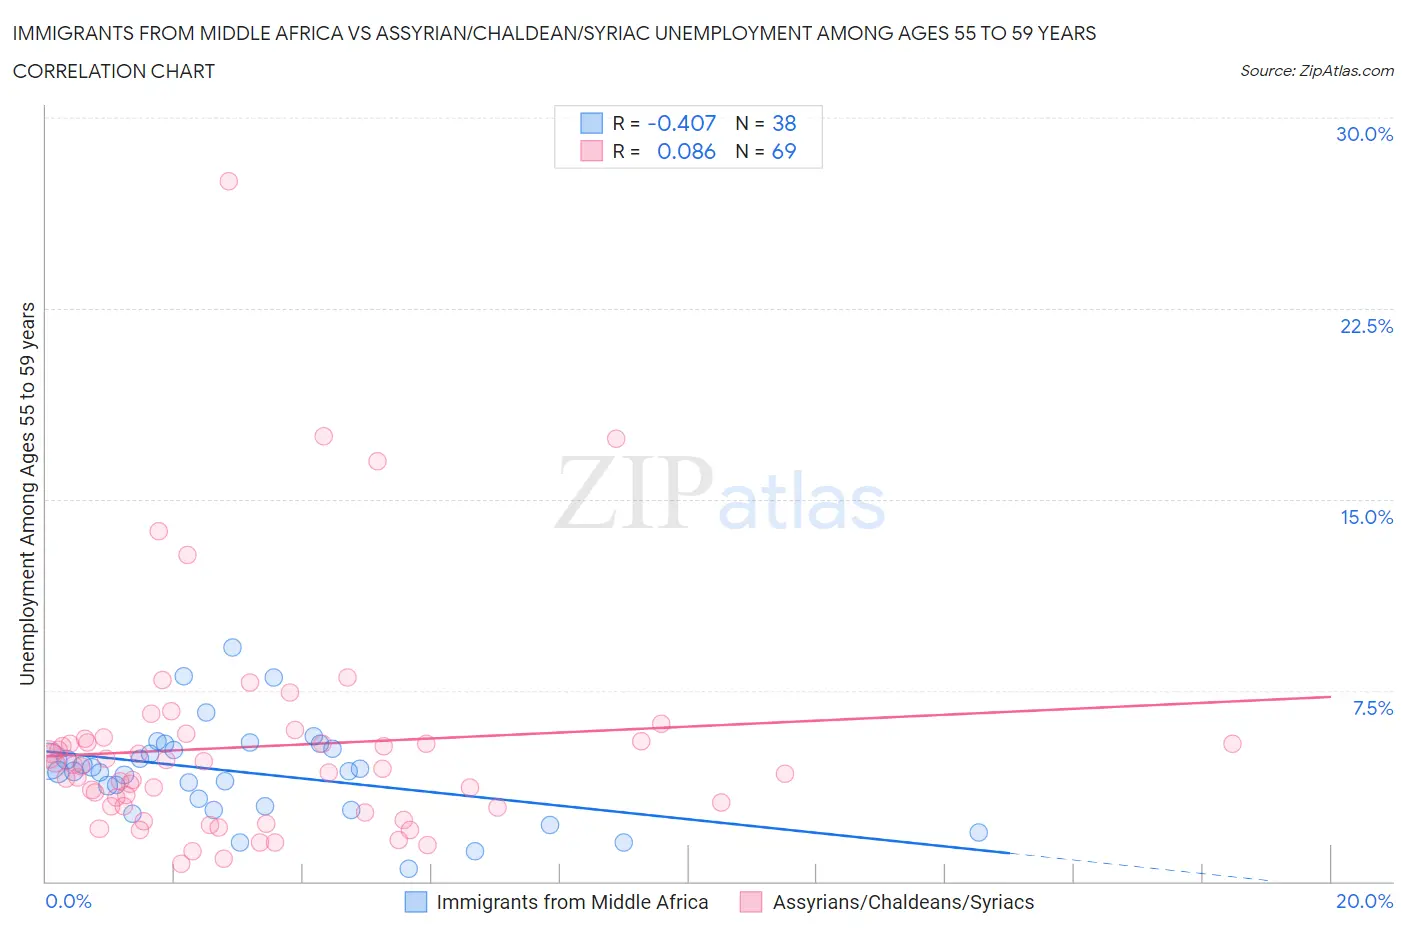 Immigrants from Middle Africa vs Assyrian/Chaldean/Syriac Unemployment Among Ages 55 to 59 years